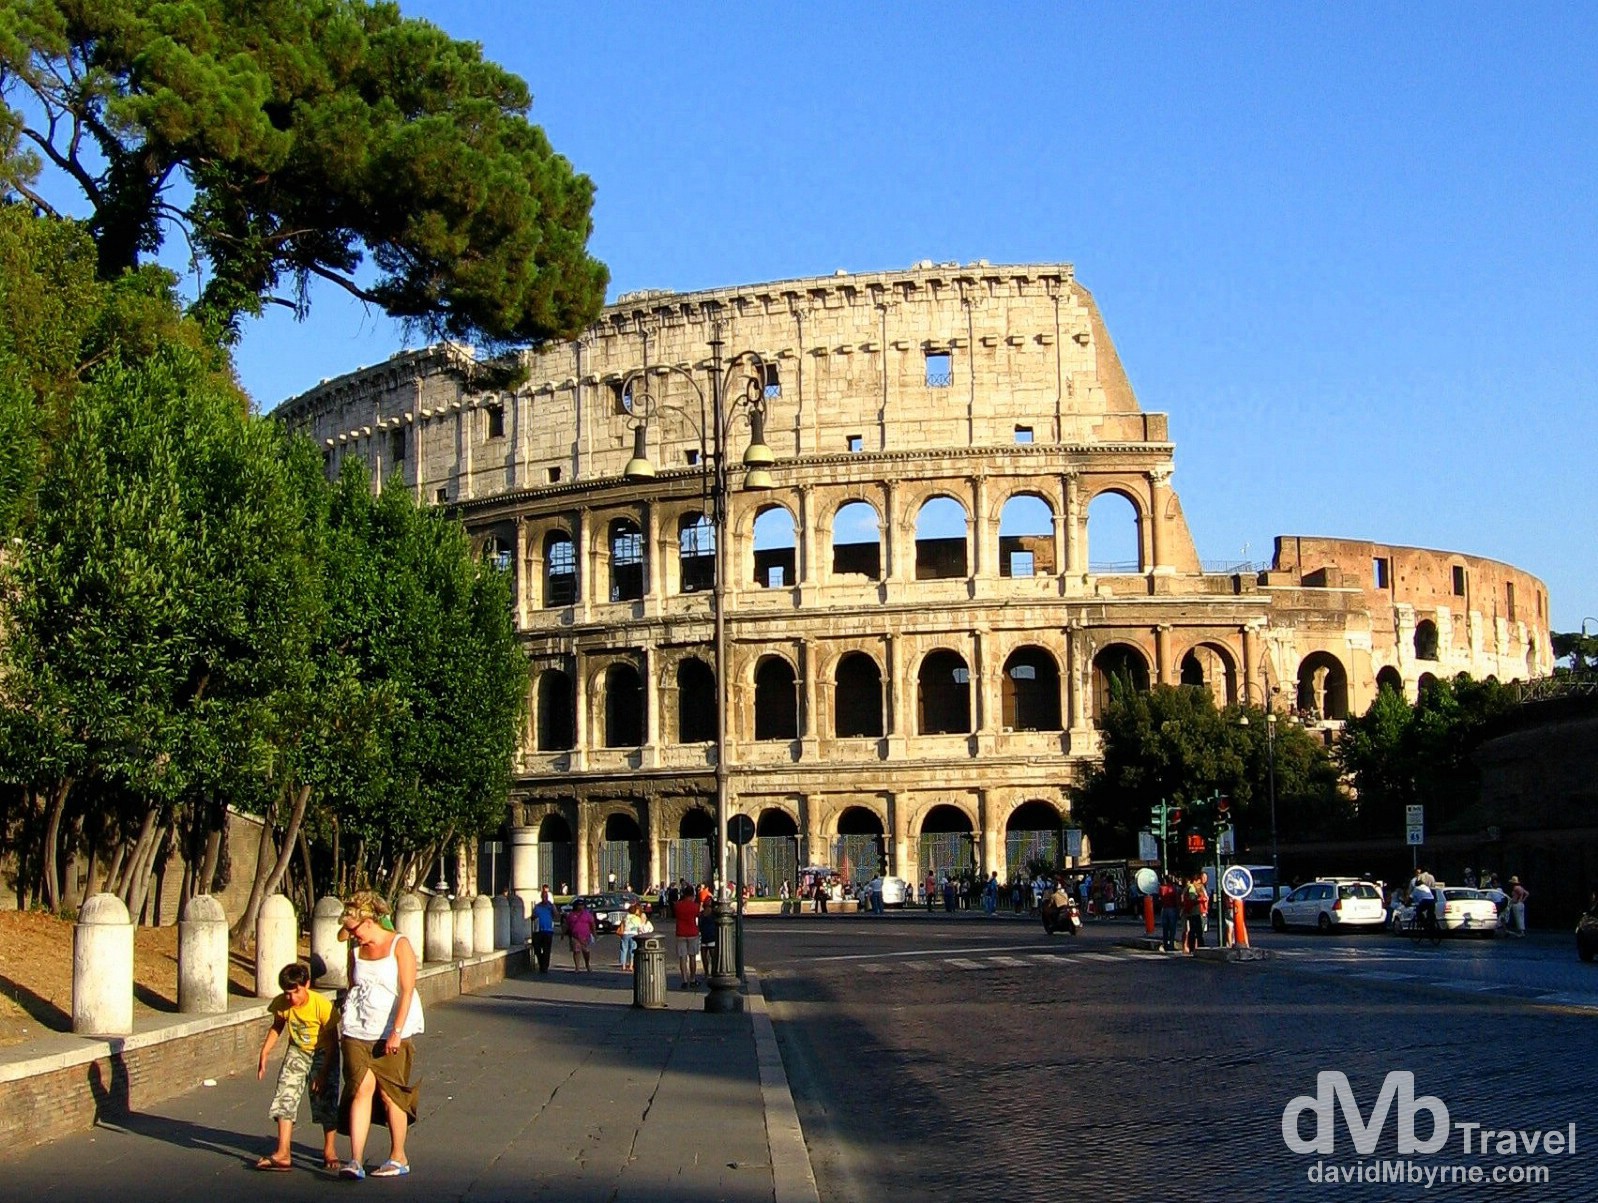 The view of the external shell of the Colosseum from Via della Fori Imperiali, Rome, Italy. September 1st, 2007.